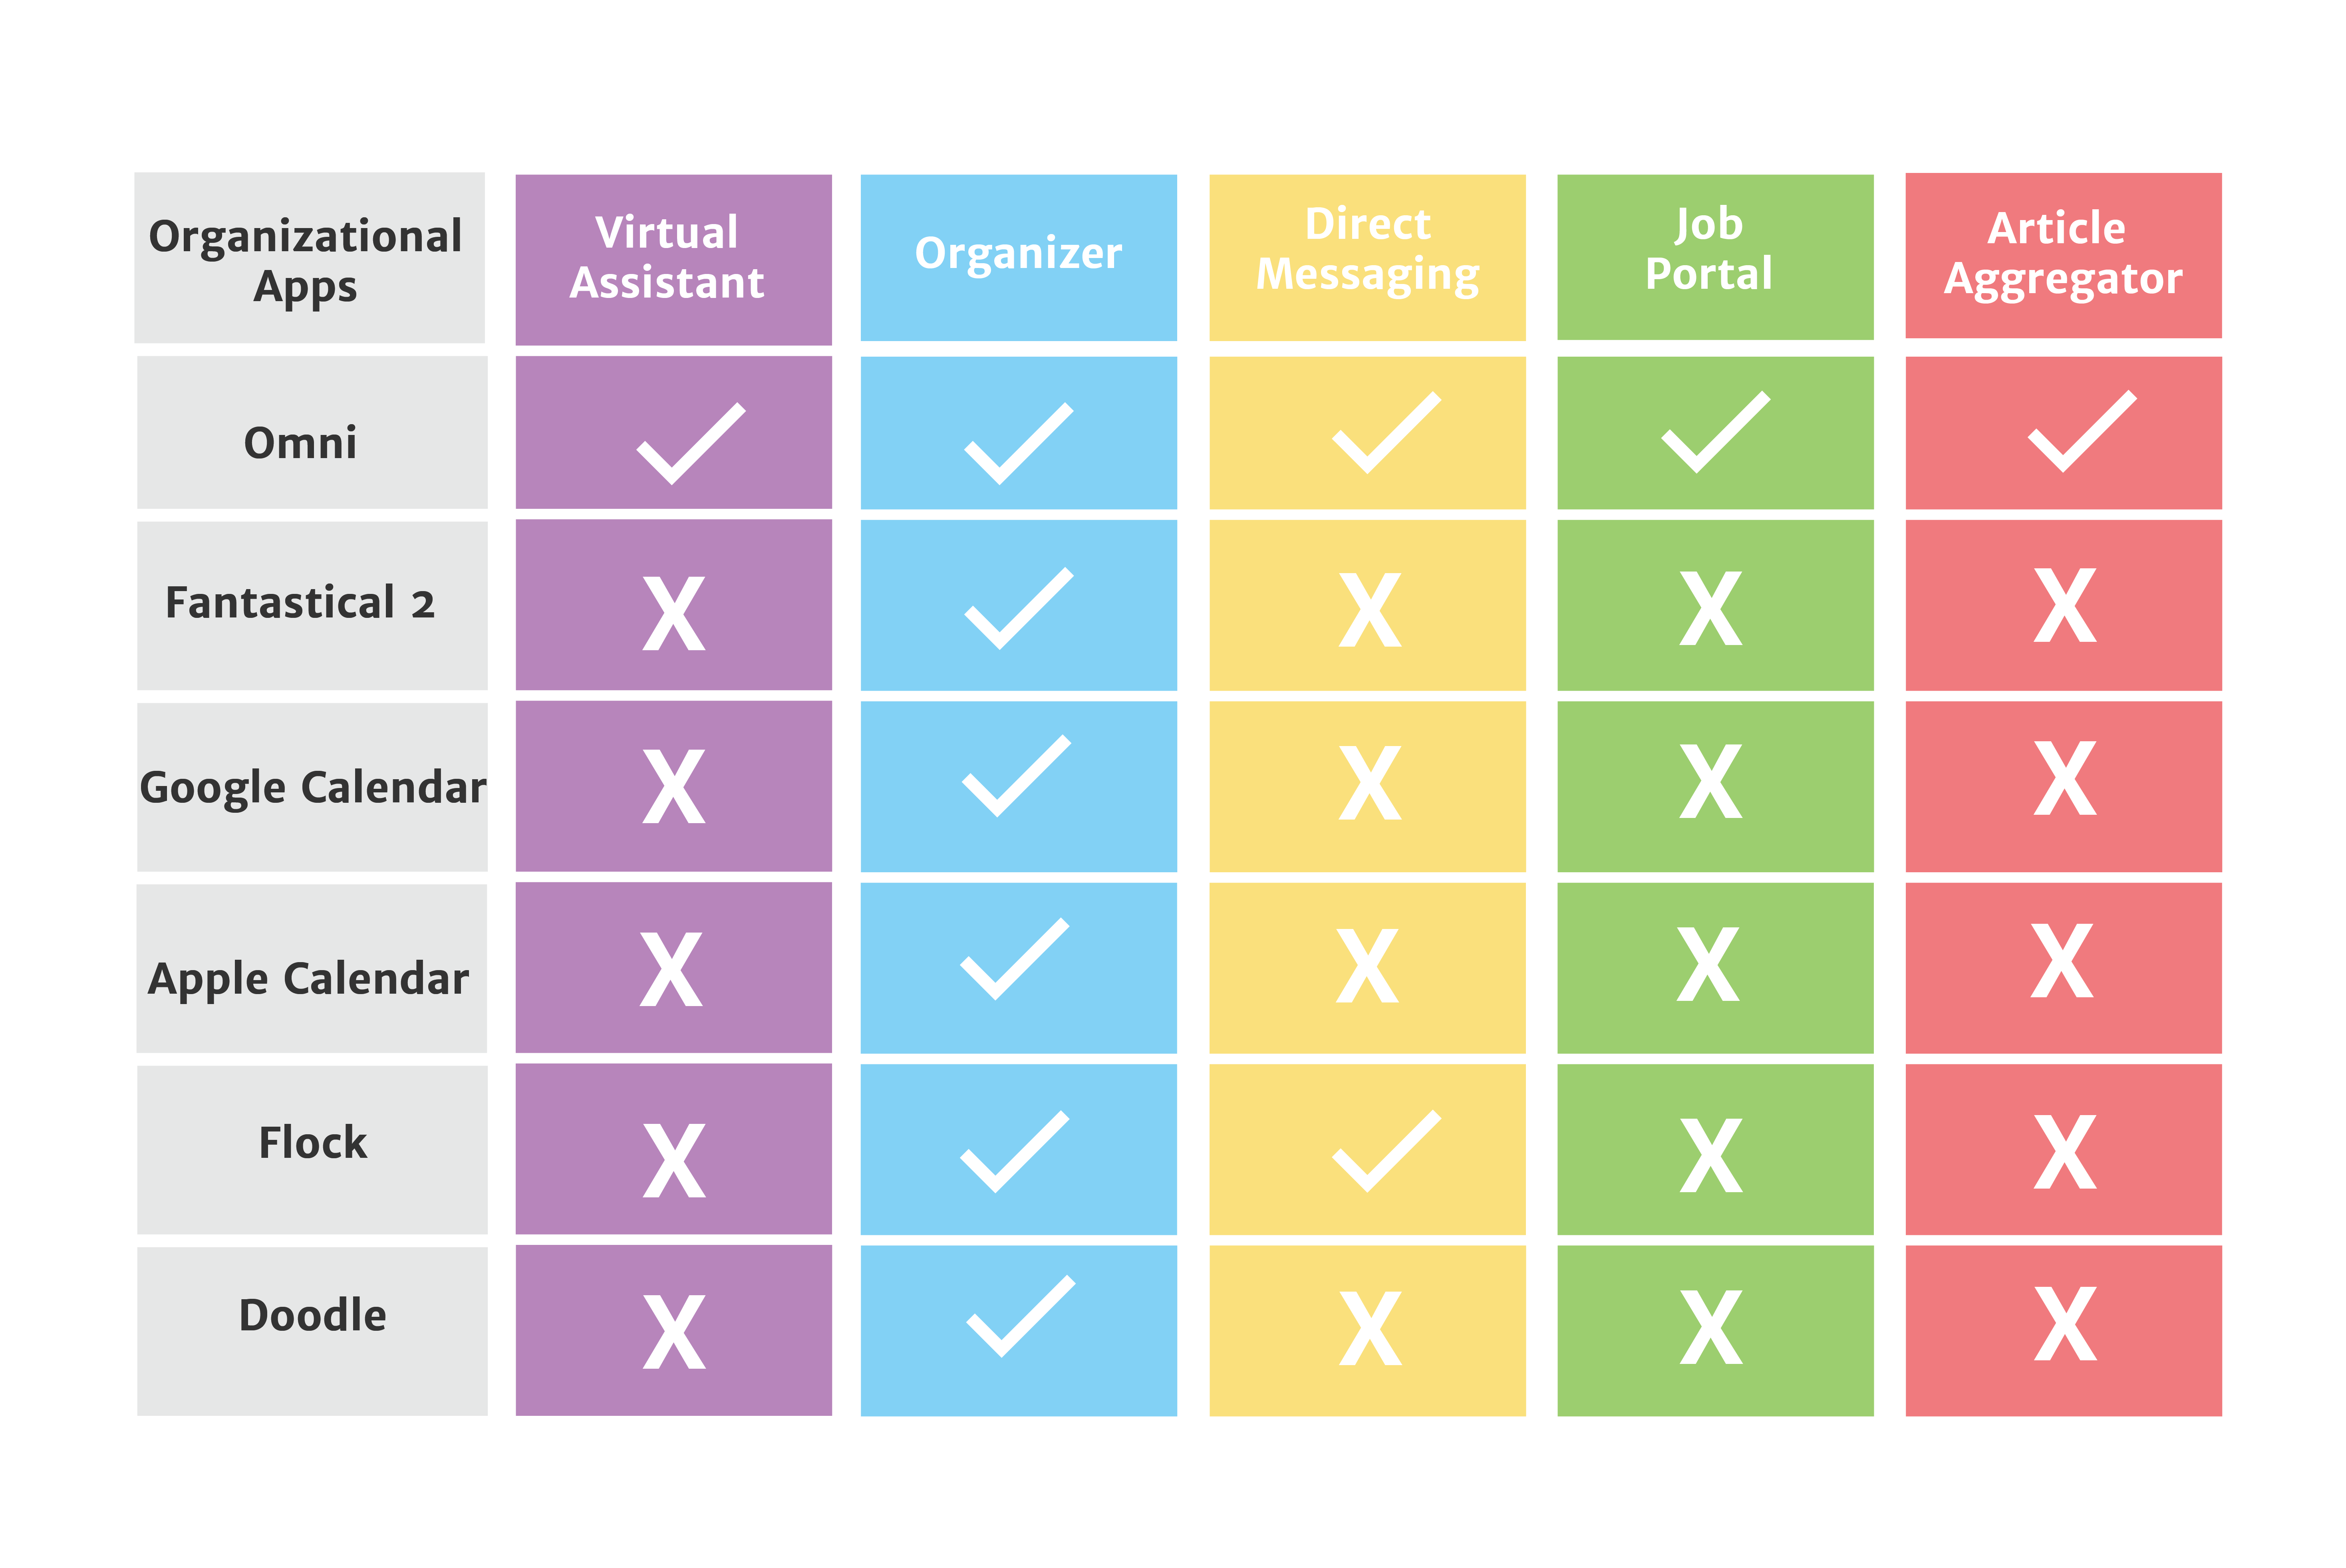 chart comparing features of organizational apps